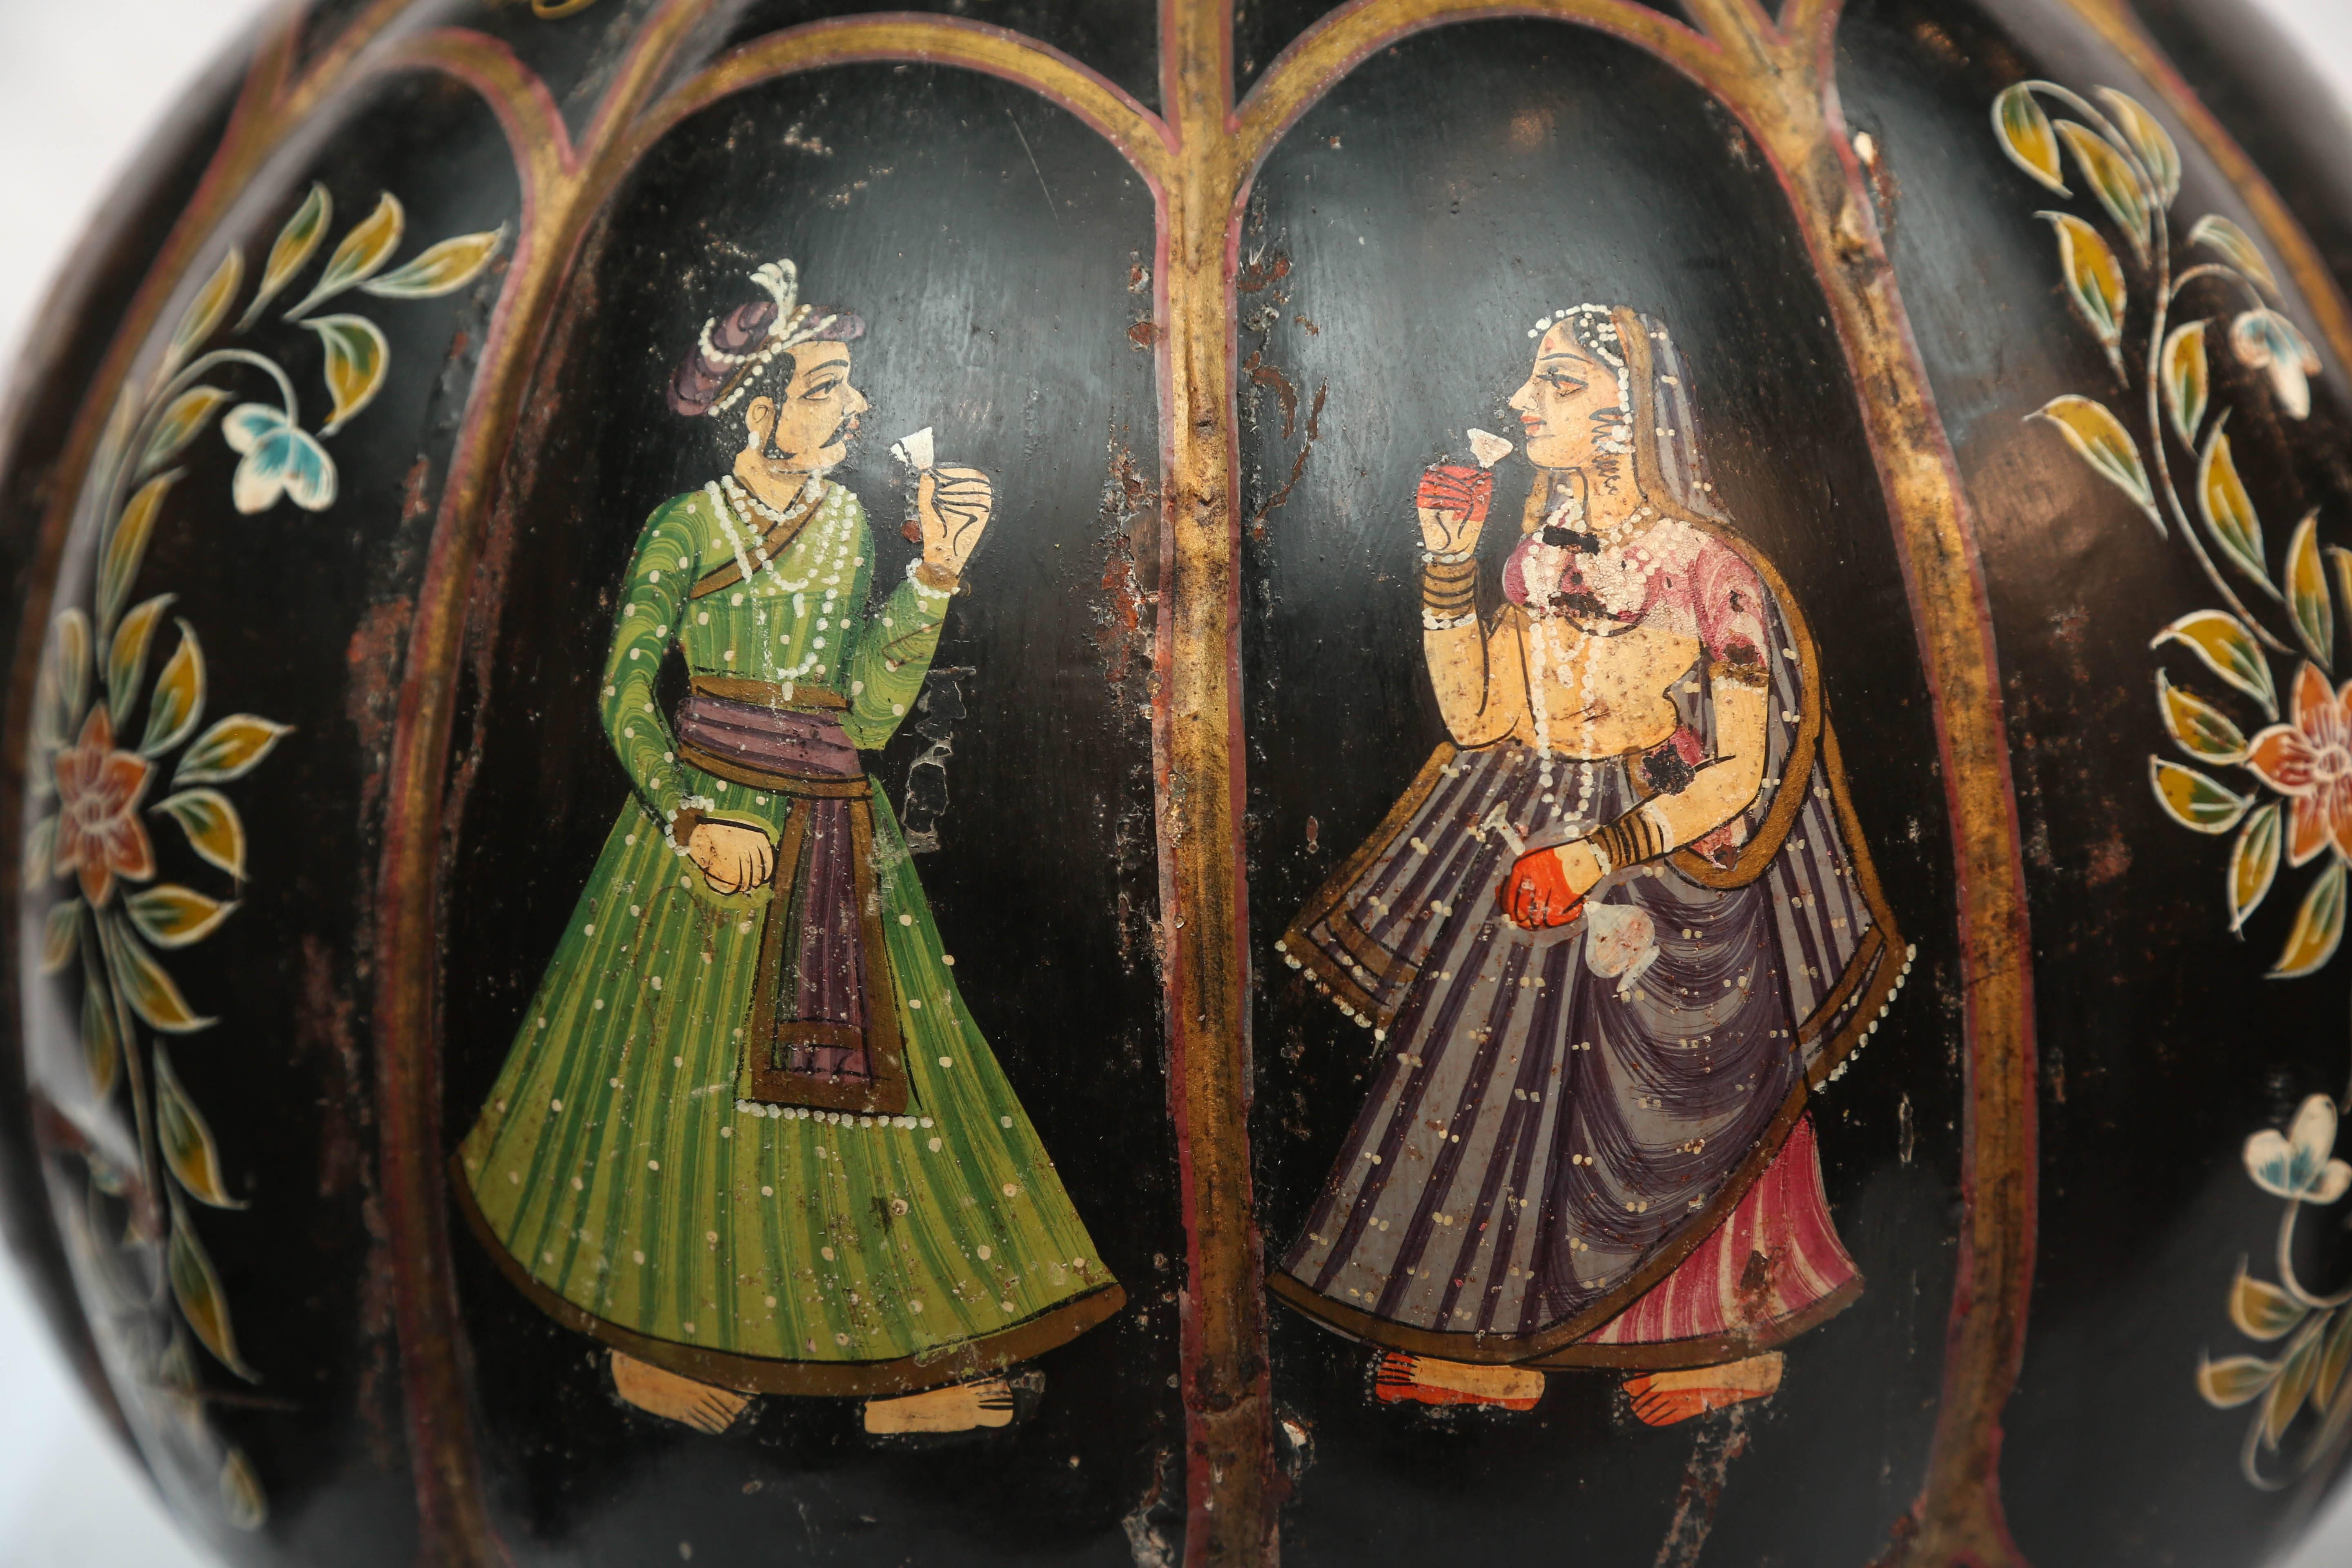 Hand painted with Mughal figures around the wonderful bulbas bodies.